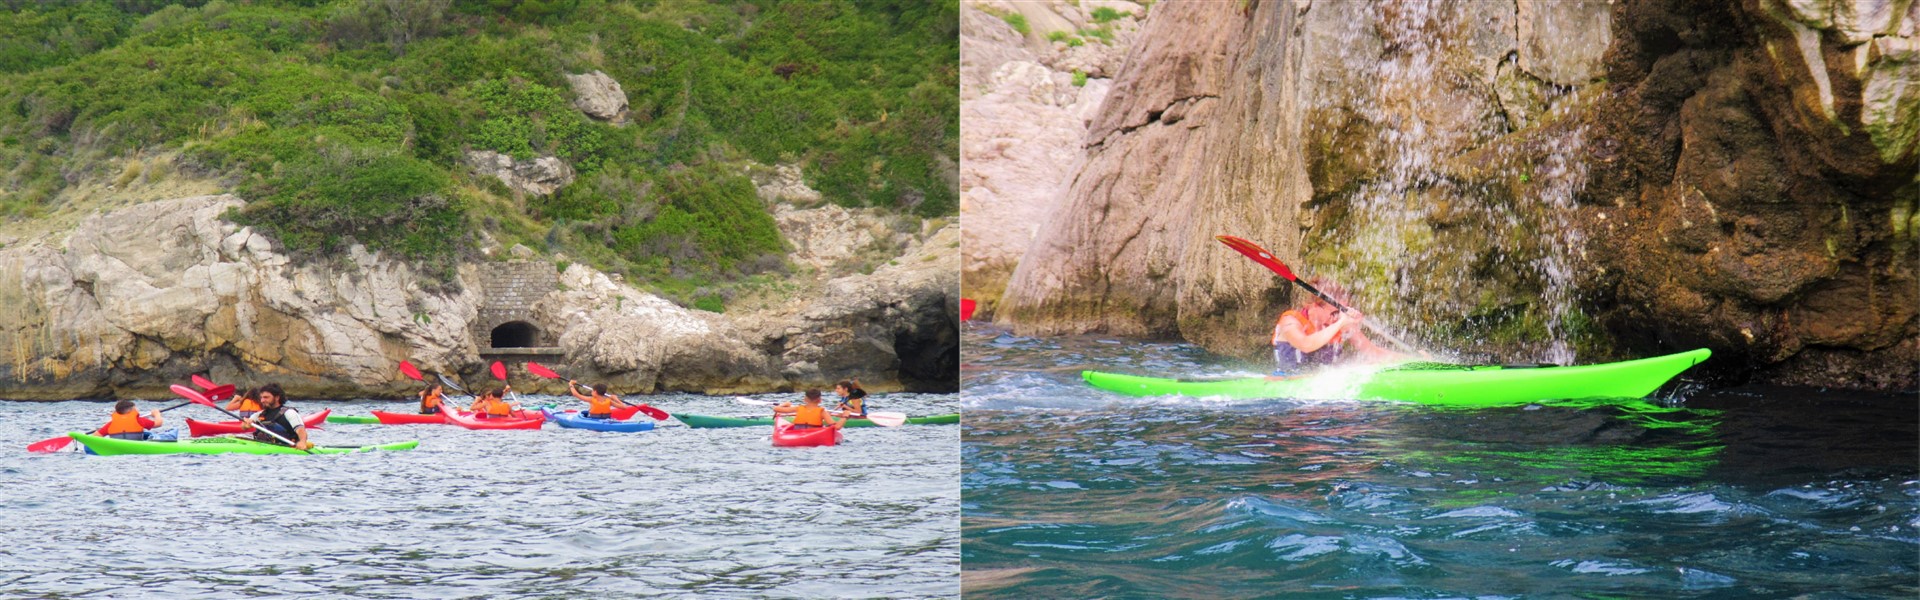 Nothing is more fun than our water sports! Choose among a wide range of activities and be ready to spend the most incredible and fund time of your vacation with us! Visit www.enchantingsorrento.com to discover them all! #kayaktours #massalubrense #tours #excursions #holidays #sorrento #enchantingsorrento